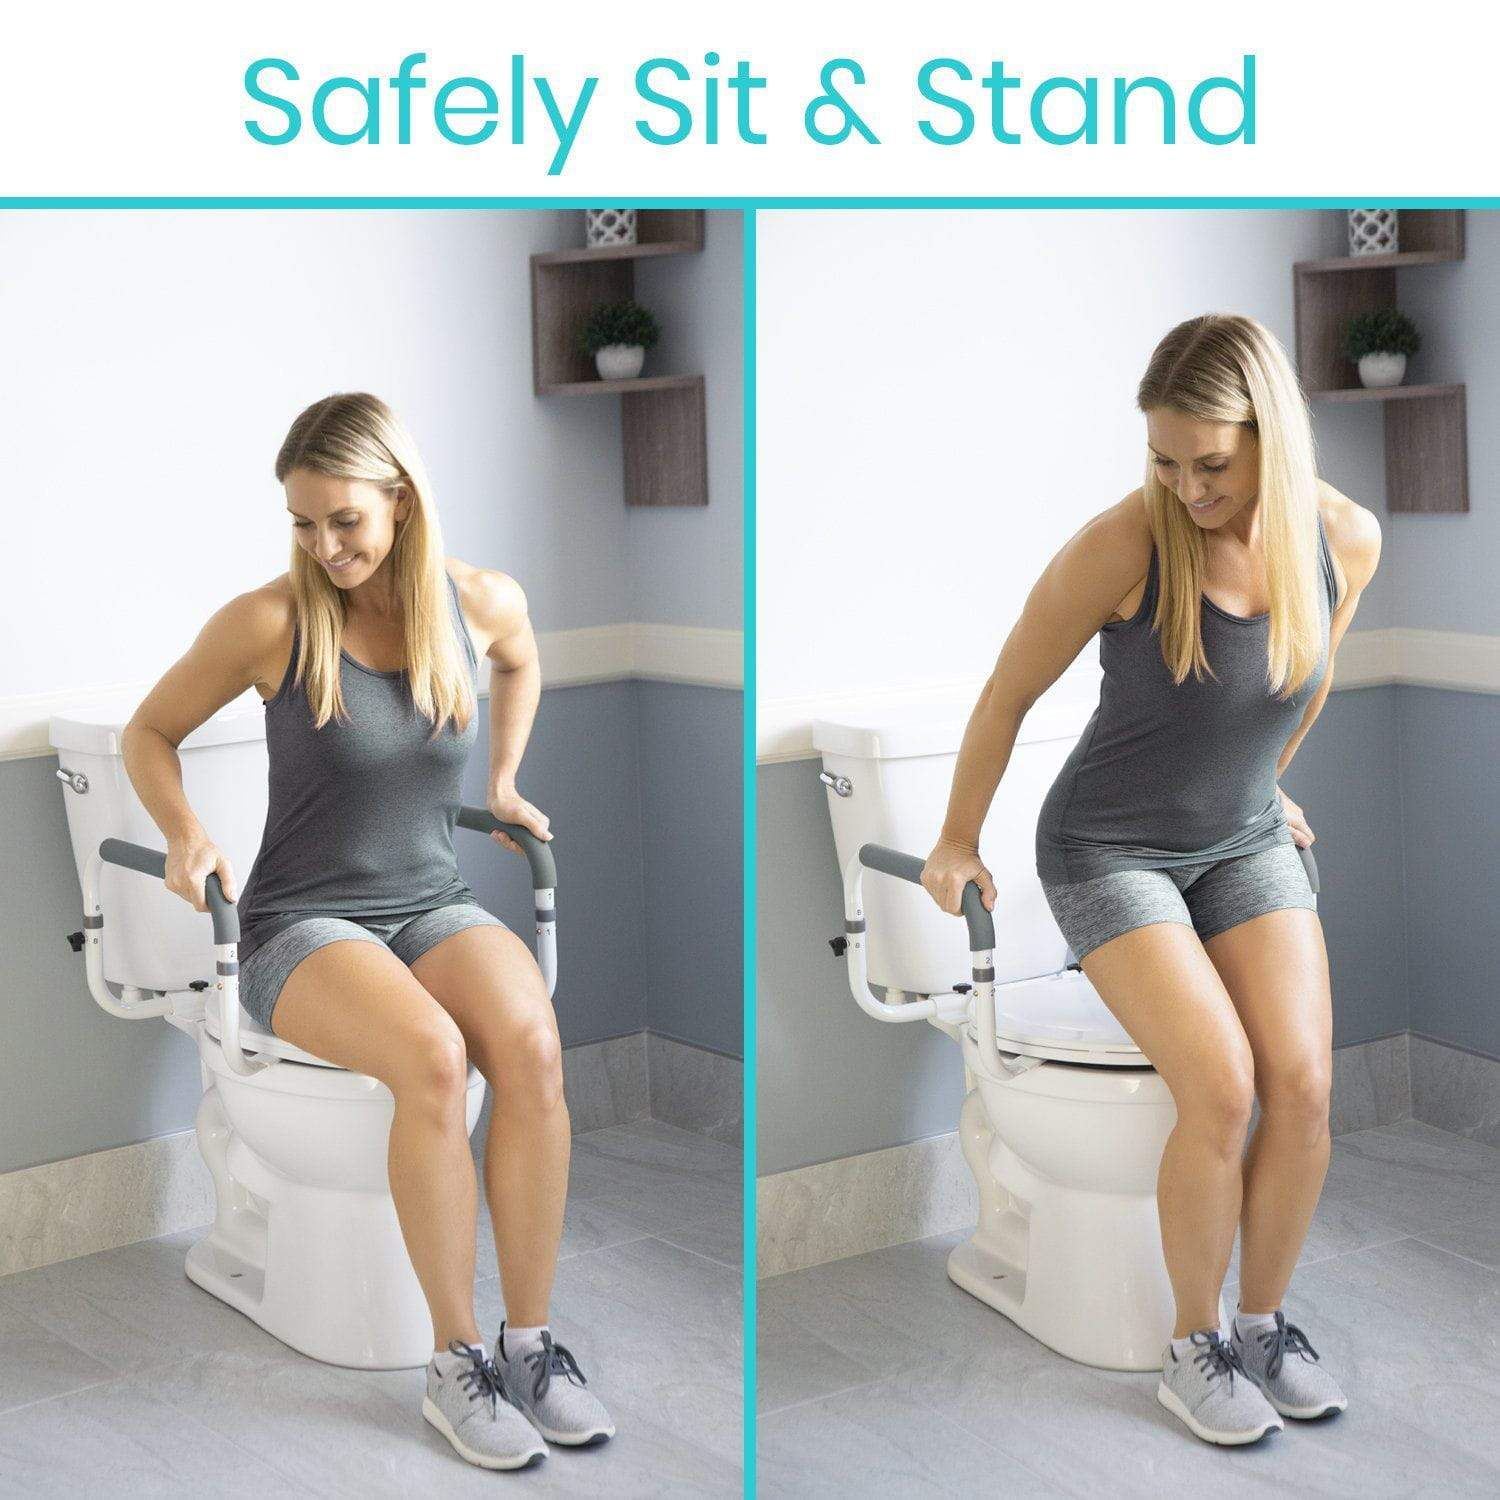 Lightweight aluminum frame and convenient adjustable height, fixated with two bolts to the toilet bowl, has rubber tips on the feet to prevent it from slipping.